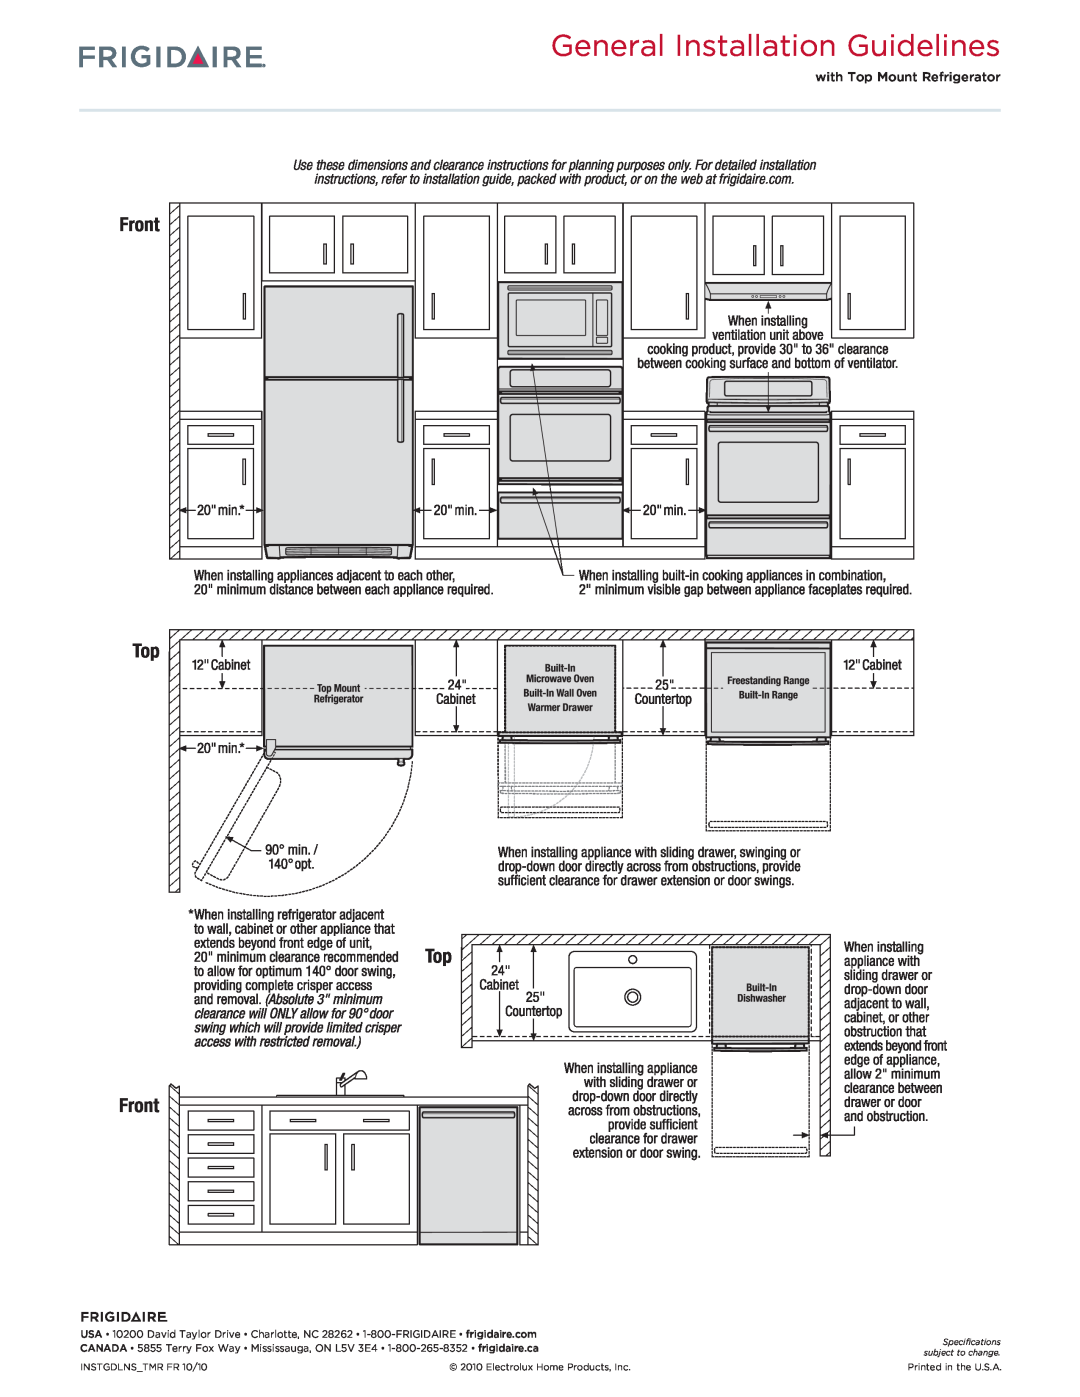 Frigidaire FGMO205K manual General Installation Guidelines, Top Front, with Top Mount Refrigerator, INSTGDLNS TMR FR 10/10 